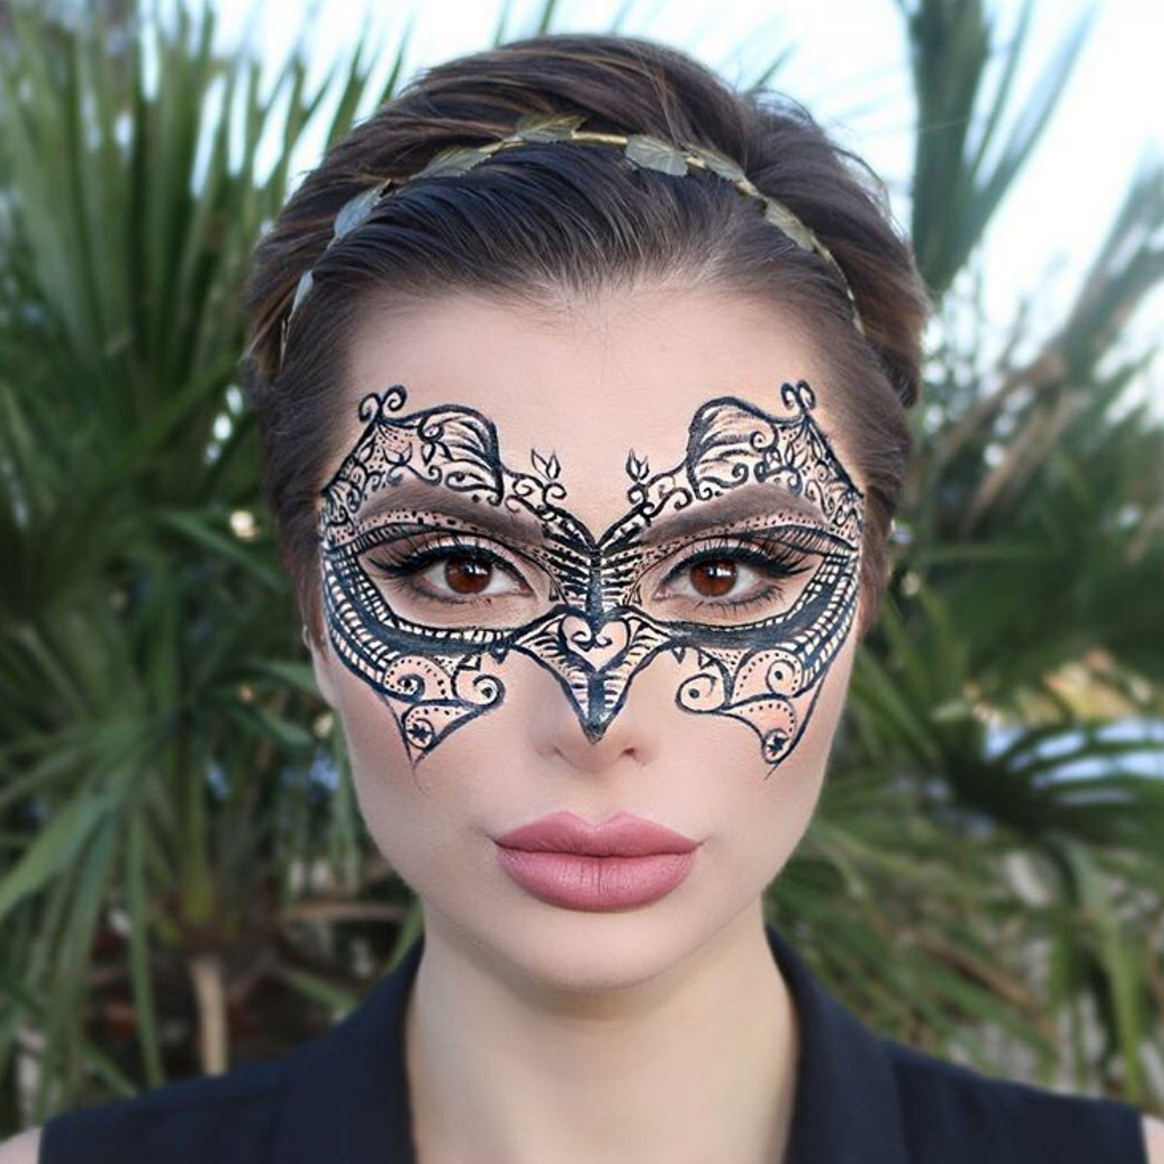 Eye Makeup For Halloween 5 Easy Halloween Makeup Ideas You Can Do With Only Eyeliner Glamour